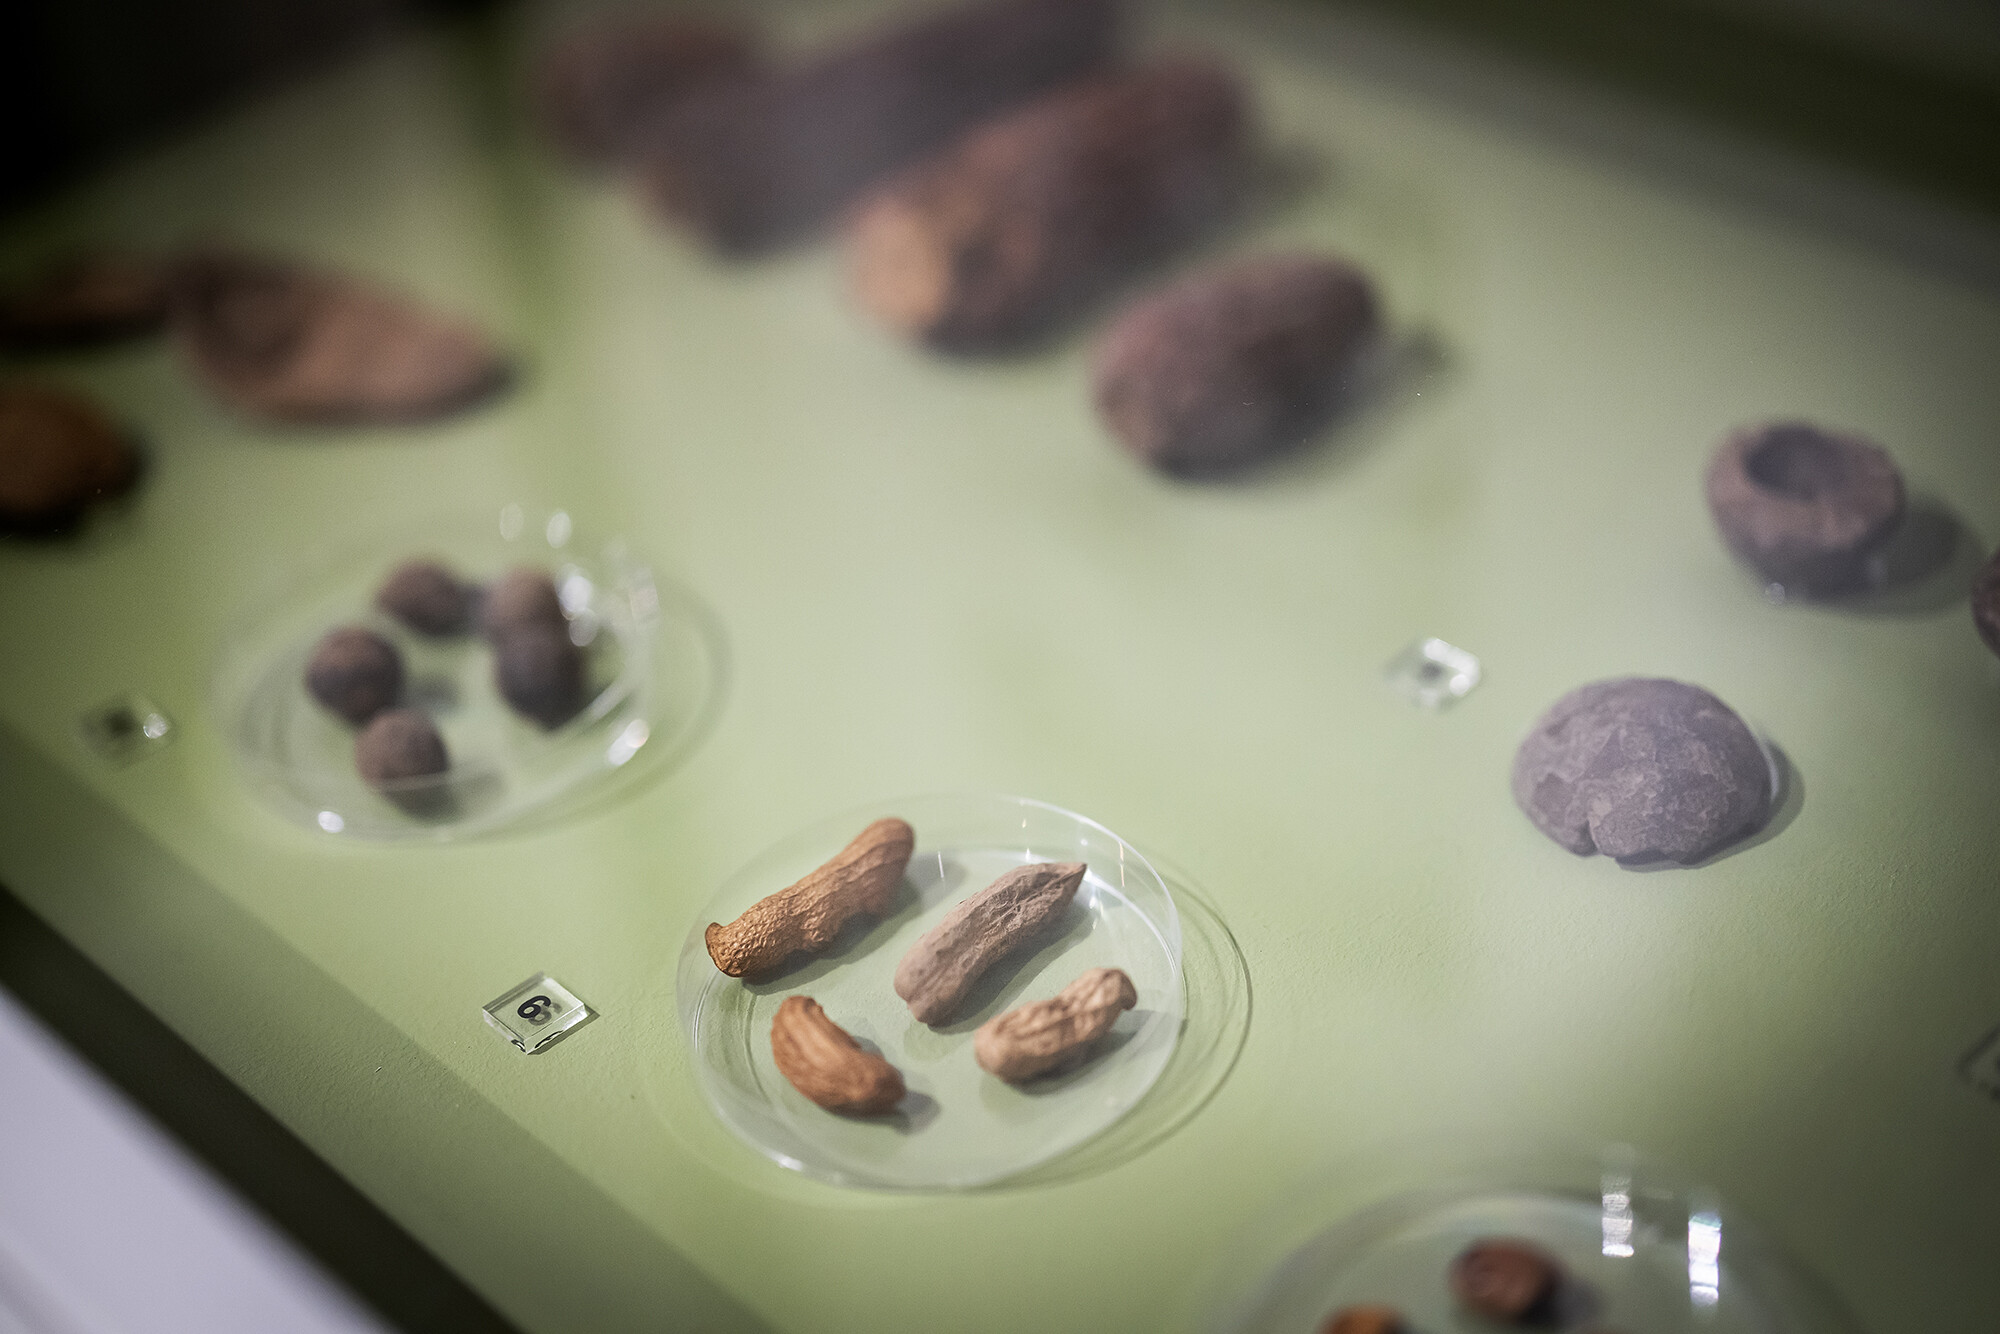 peanuts and other dried foods in petrie dishes in a display case